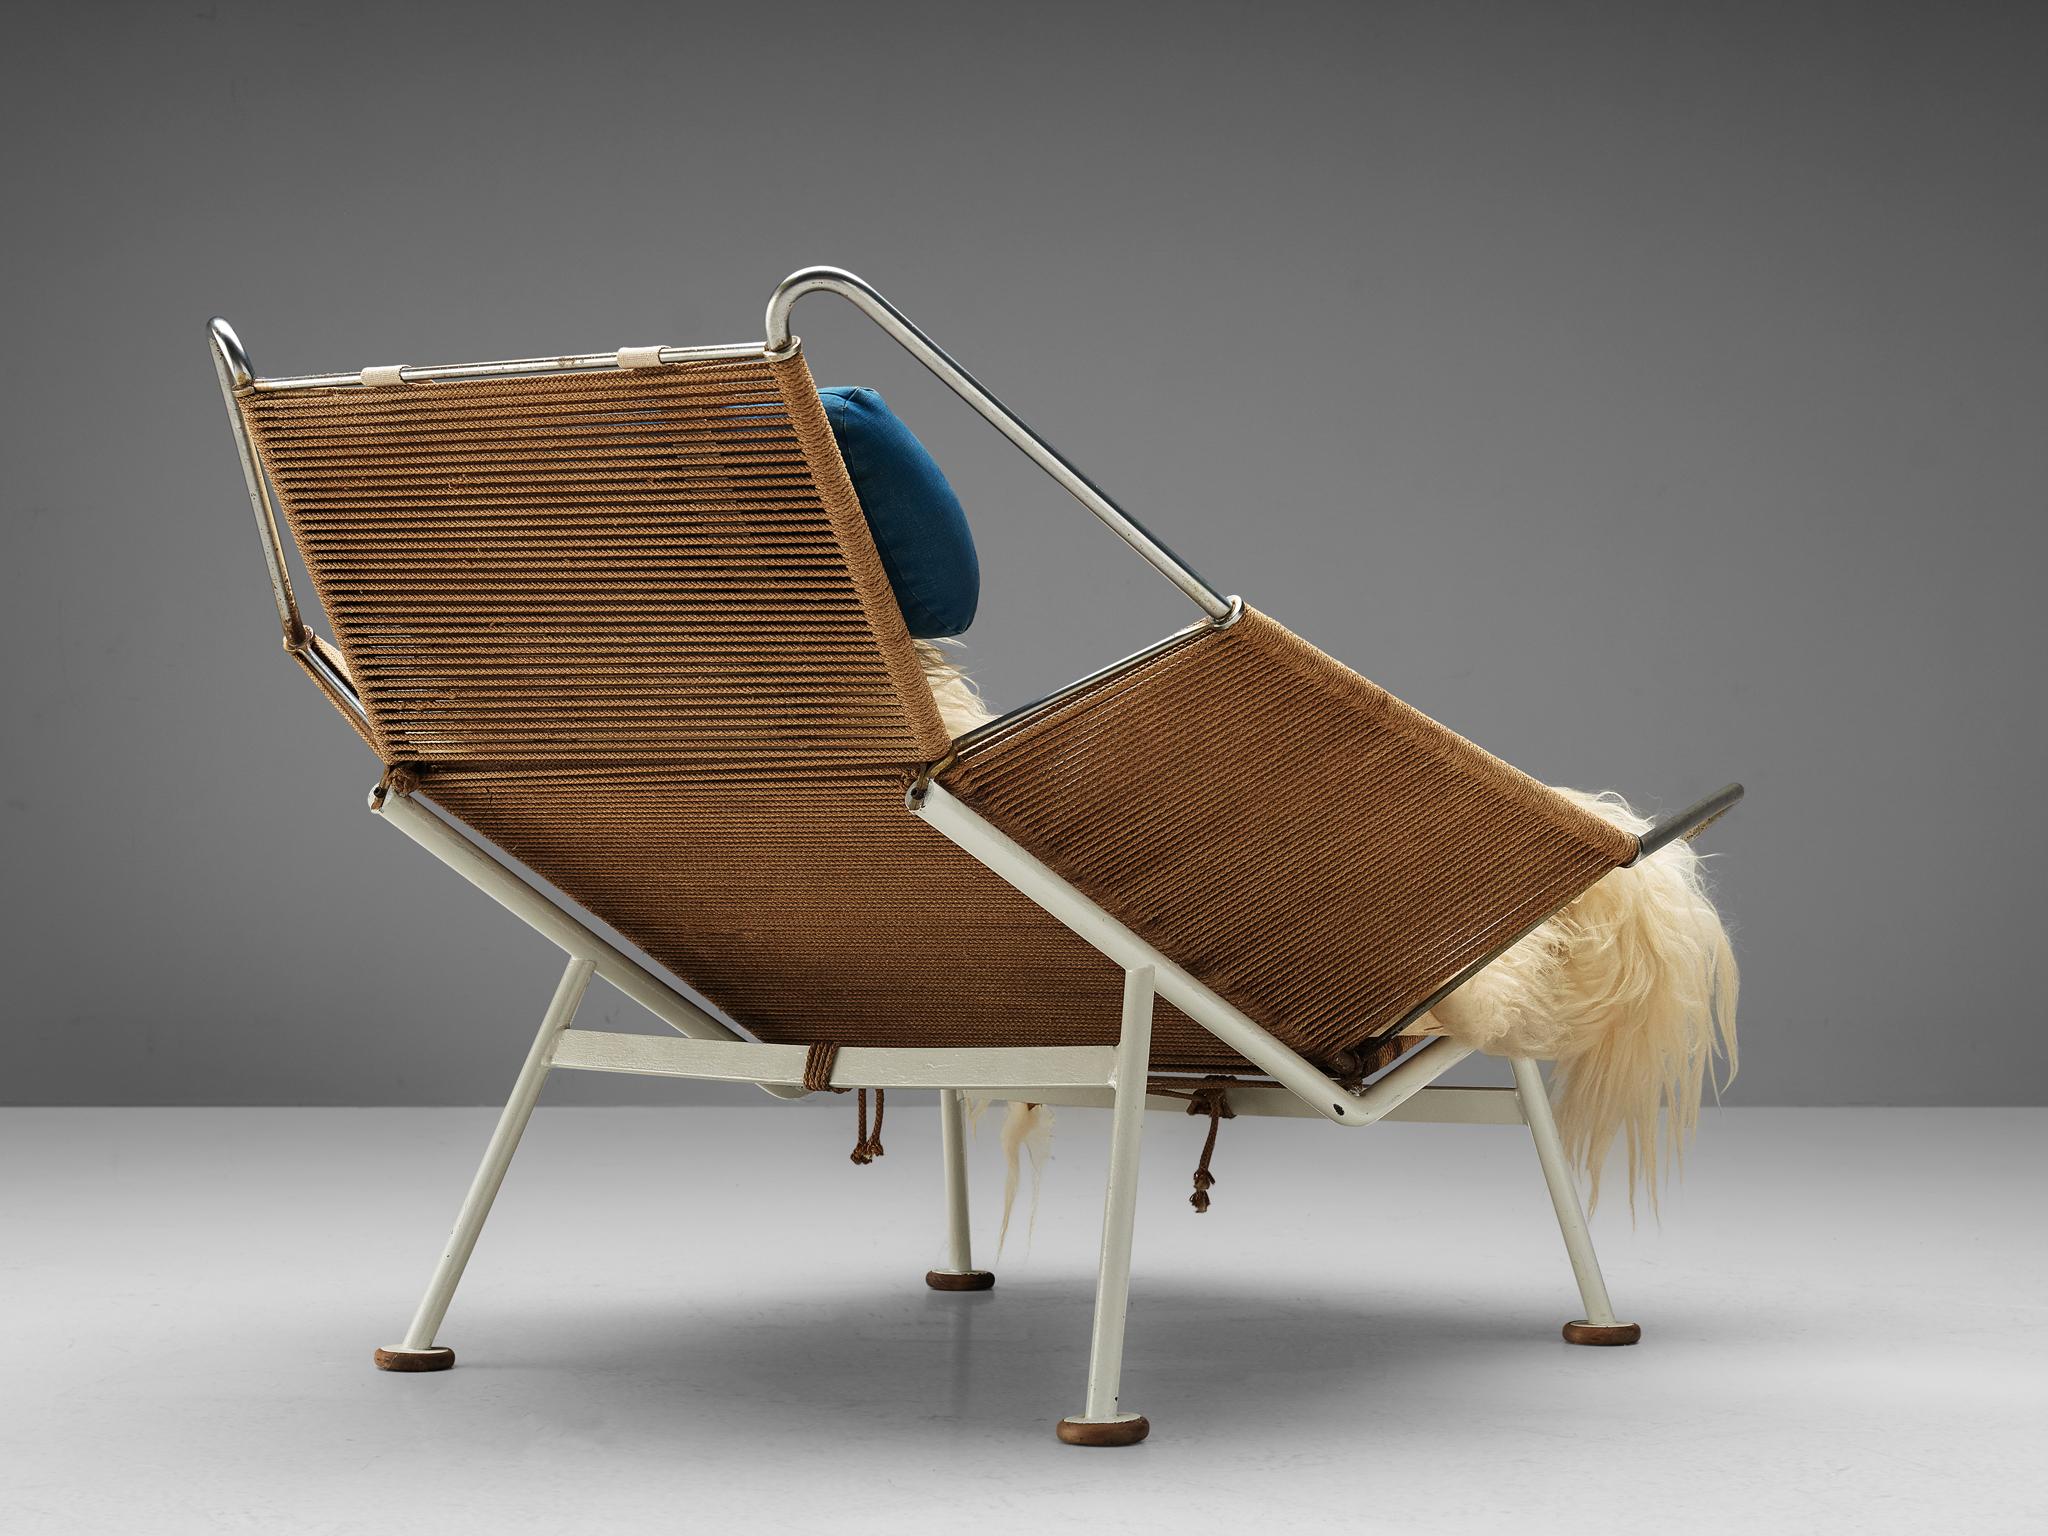 Hans Wegner, Flag Halyard chair GE225, rope, white lacquered steel, Denmark, 1950.

This iconic chair, made with 250 meter of rope, is designed by Hans Wegner. The name Flag Halyard simply comes from the innovative material with which Wegner makes